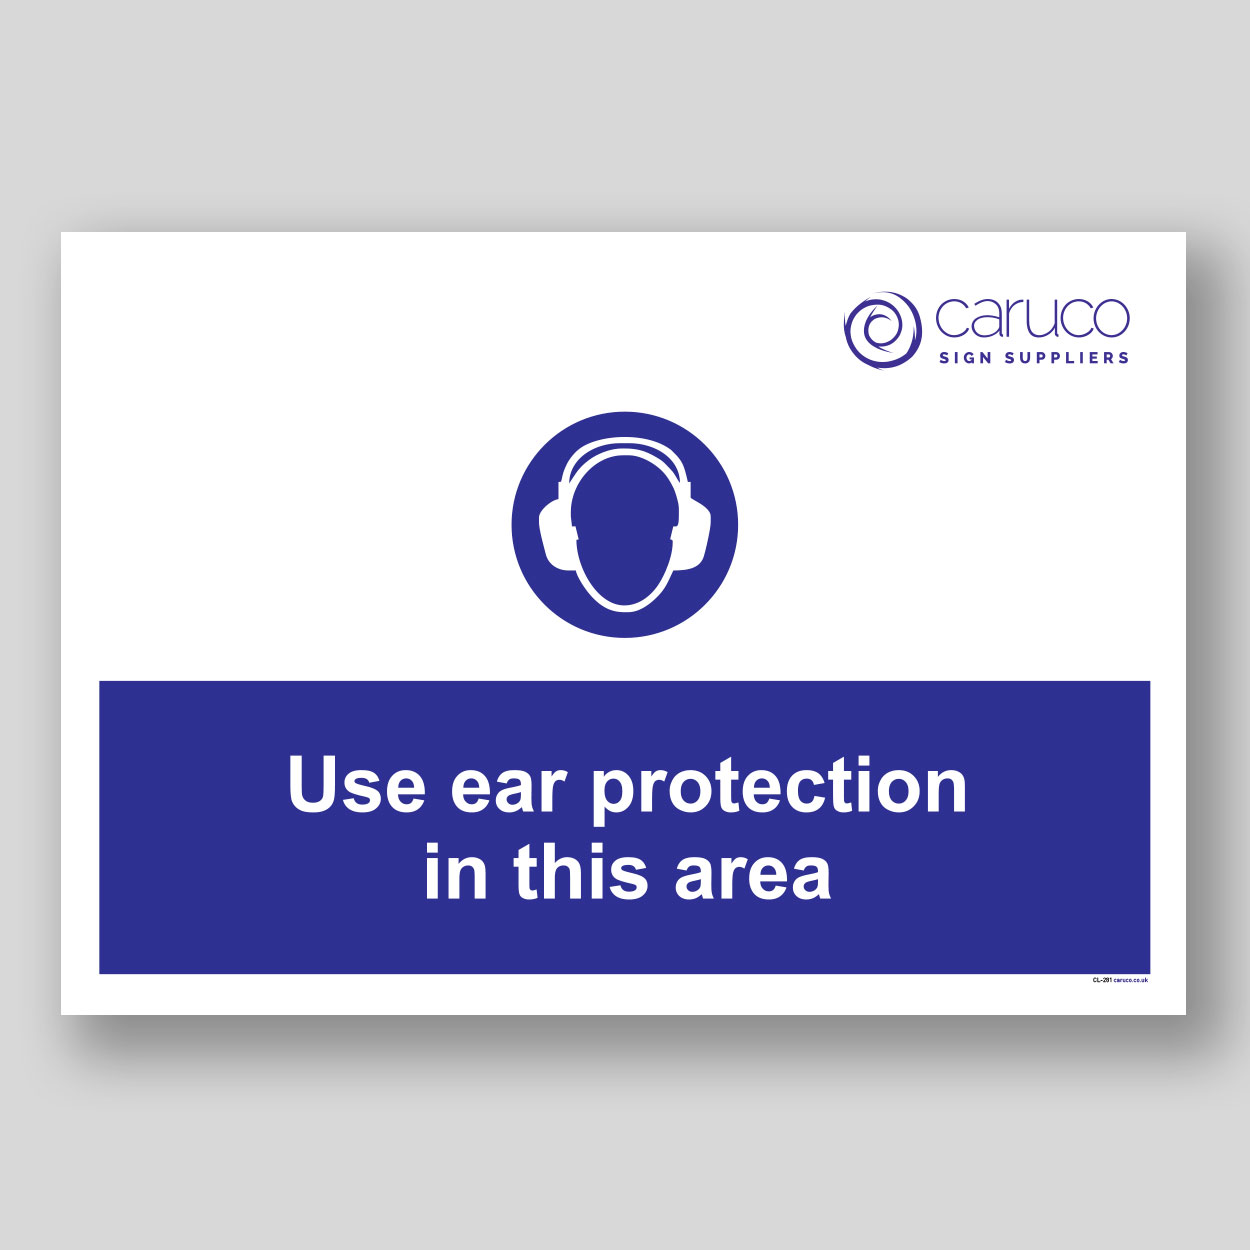 CL-281 Use ear protection in this area